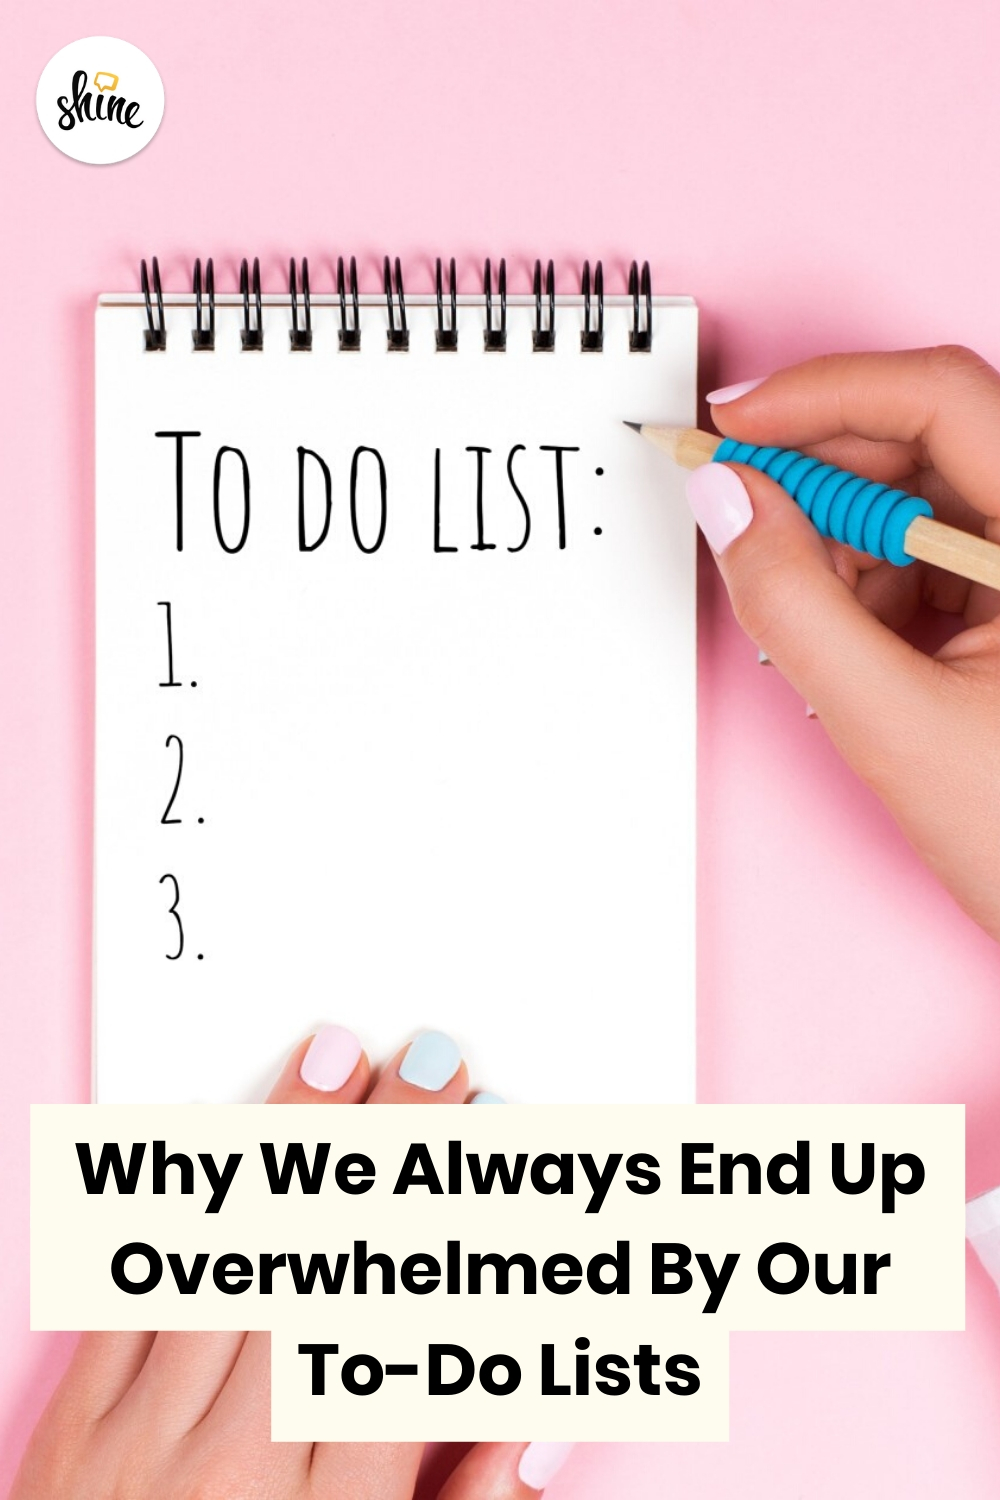 Why We End Up Overwhelmed By Our To-Do List